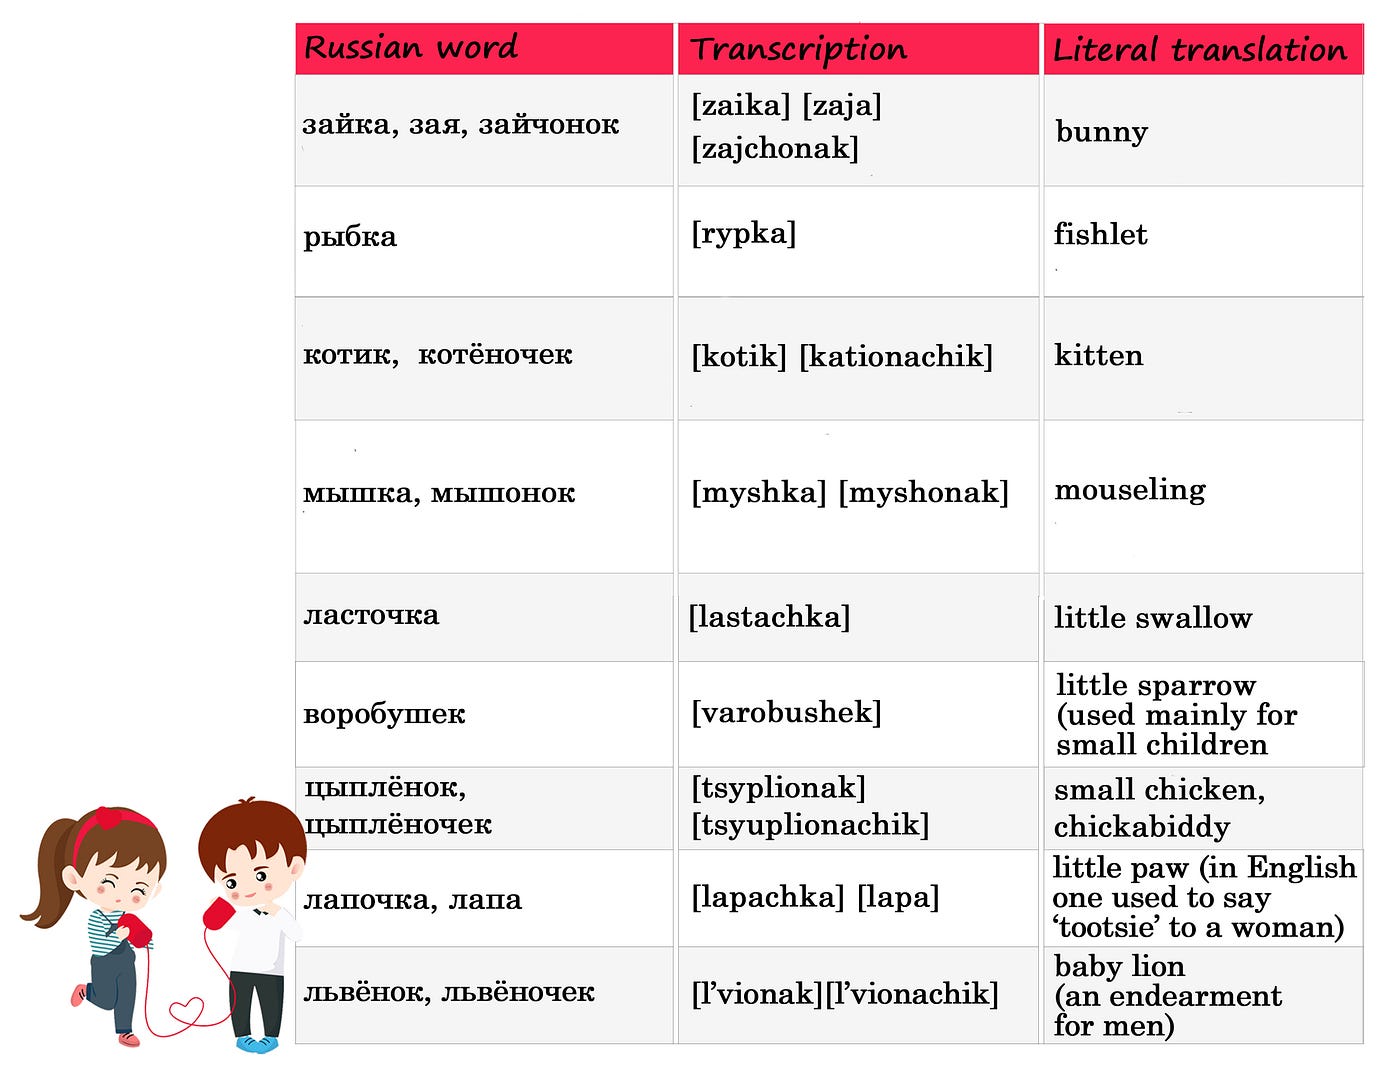 10 Russian Terms of Endearment